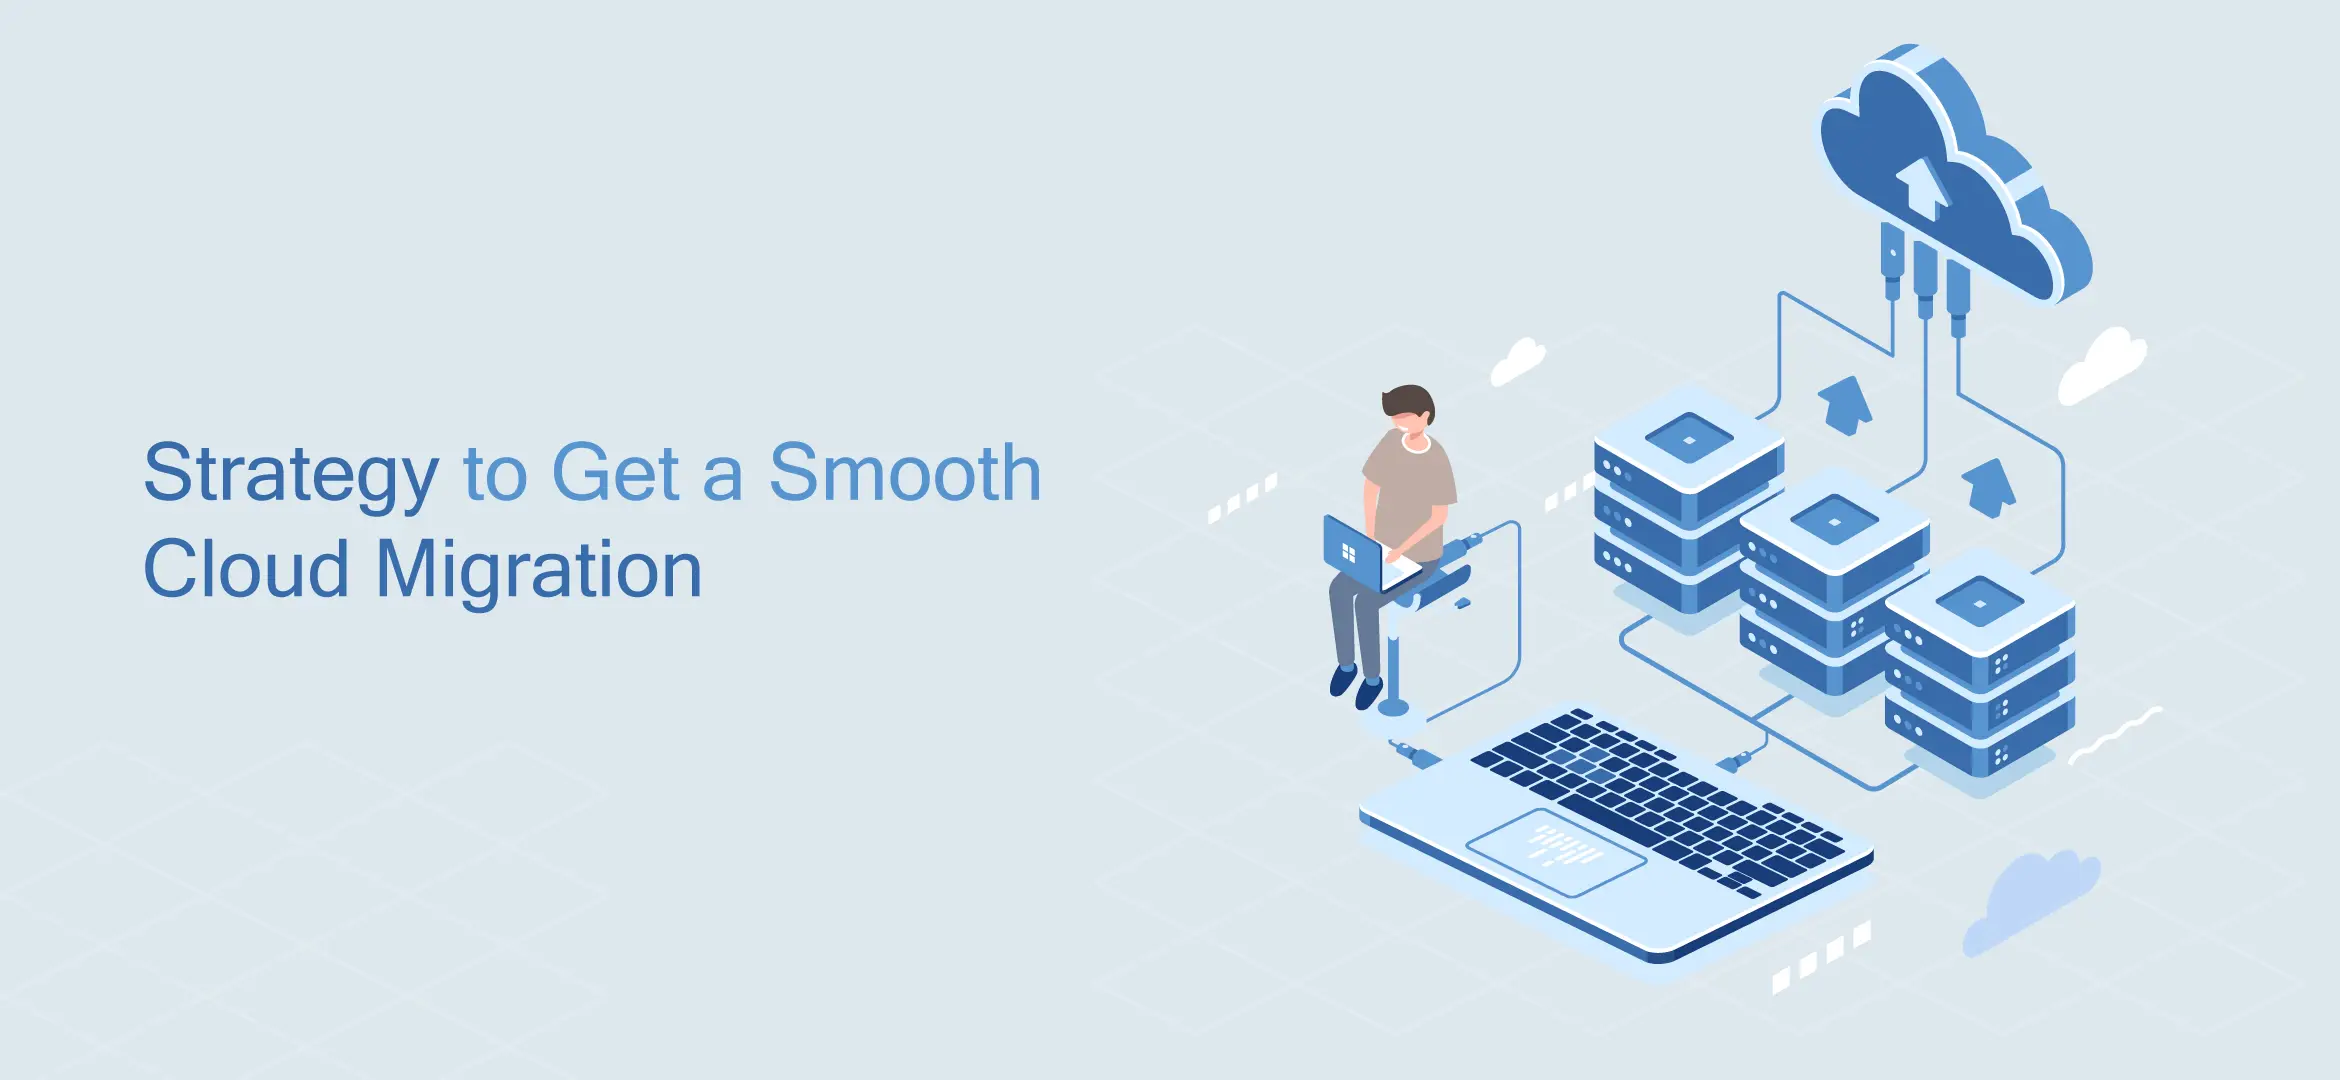 Strategy to Get a Smooth Cloud Migration